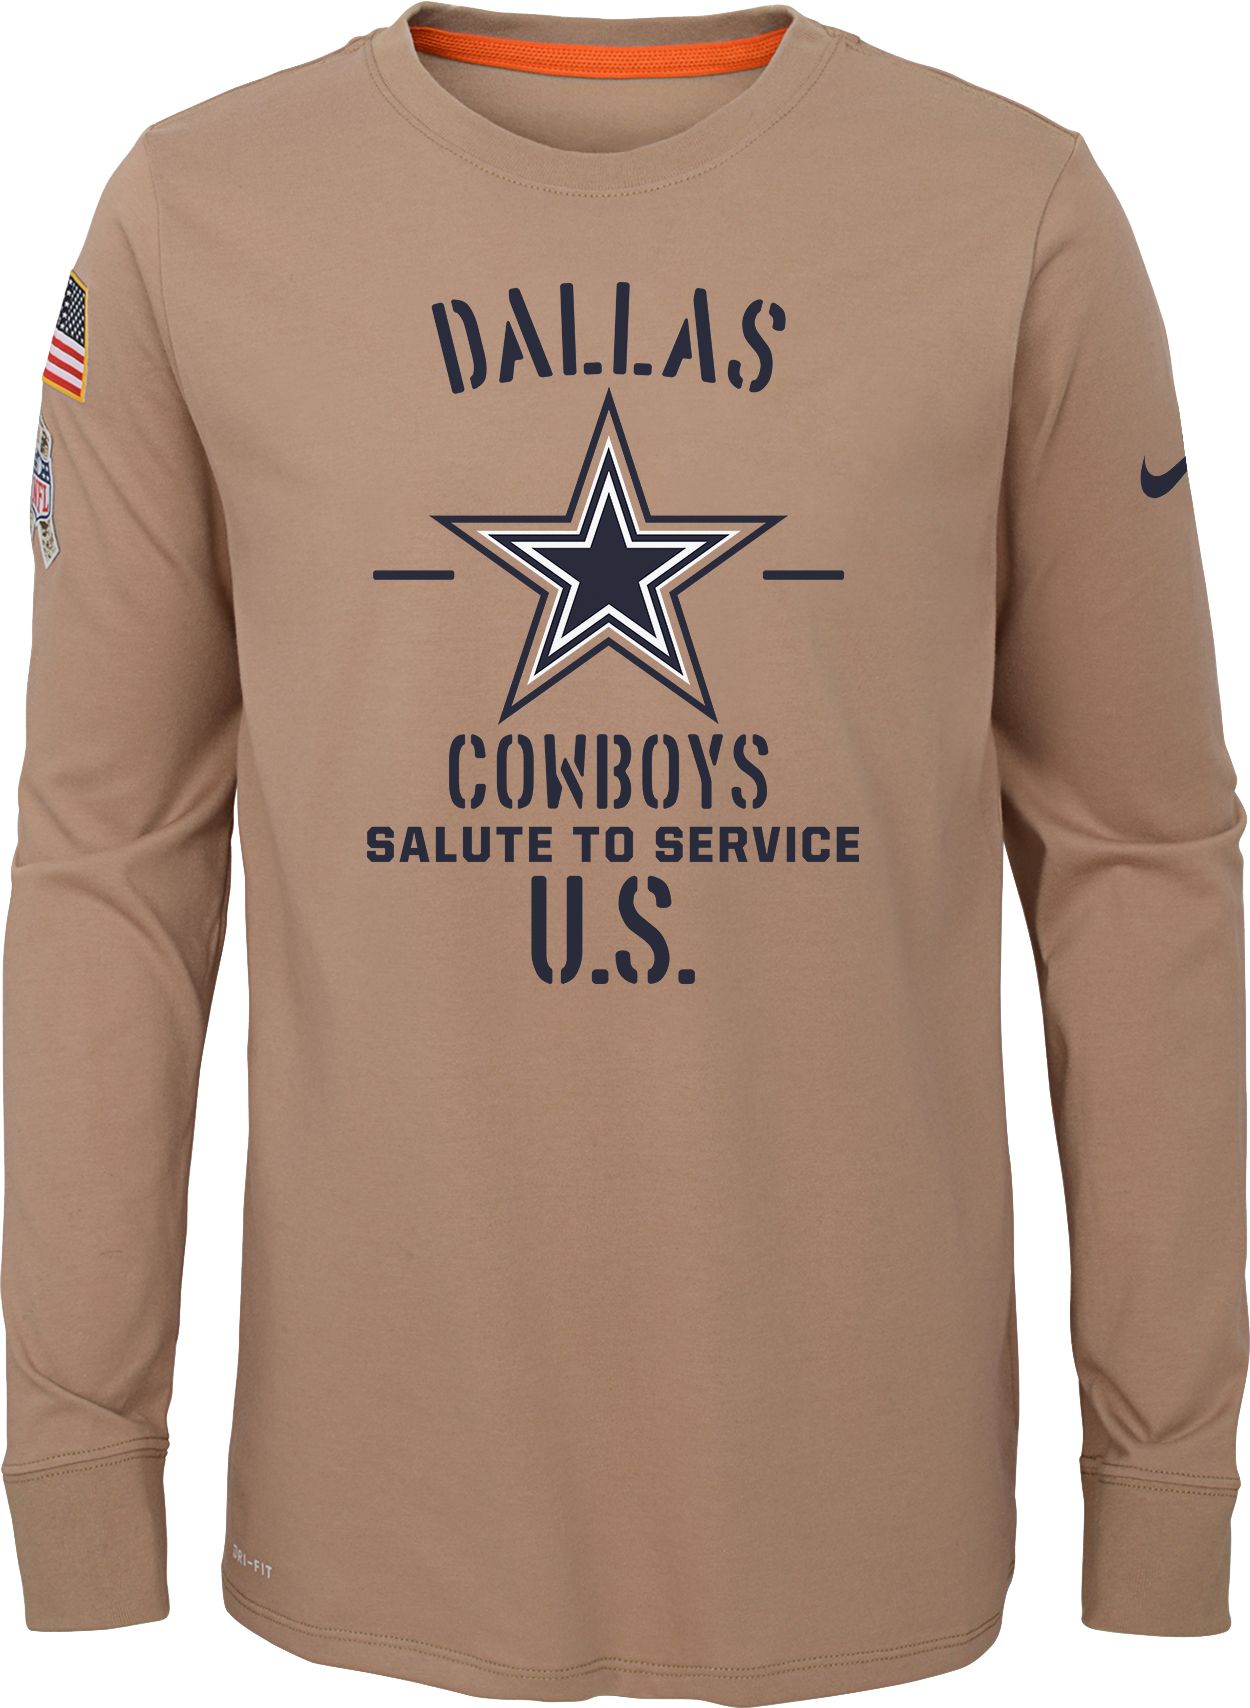 Dallas Cowboys Salute To Service Long Sleeve Shirt on Sale - www